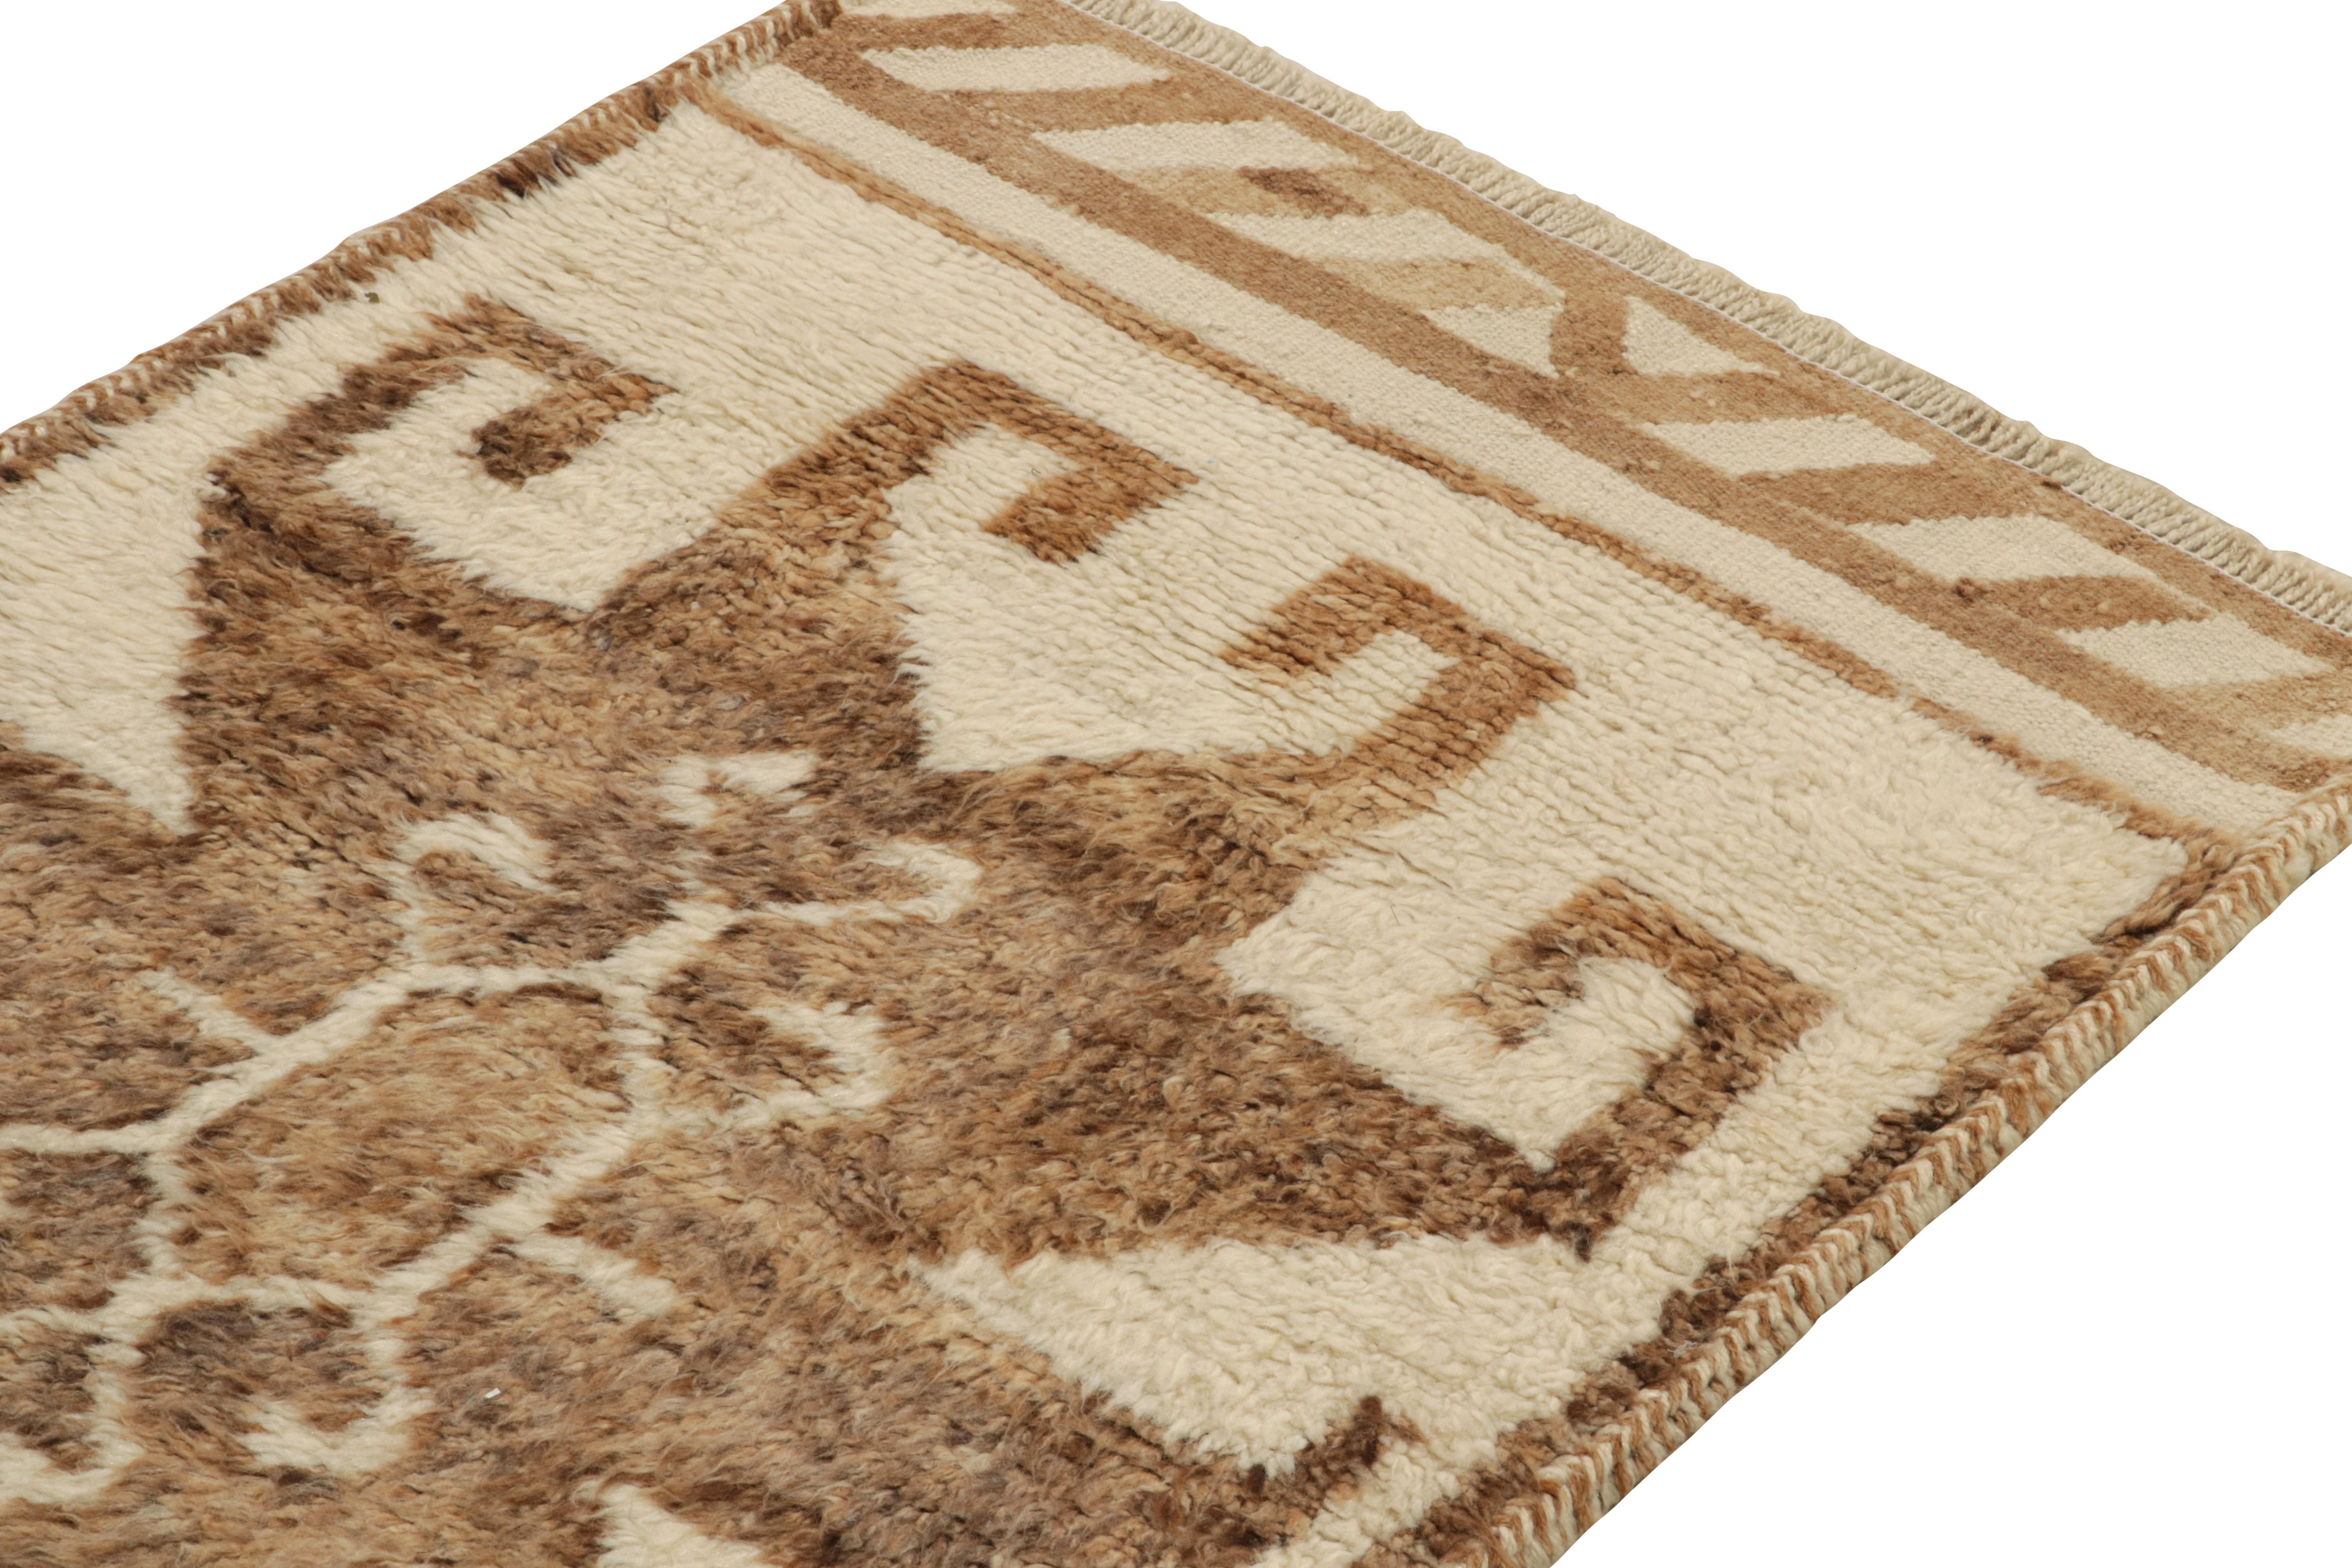 Hand-Knotted Vintage Tribal Runner in Beige-Brown Geometric Patterns, Style by Rug & Kilim For Sale